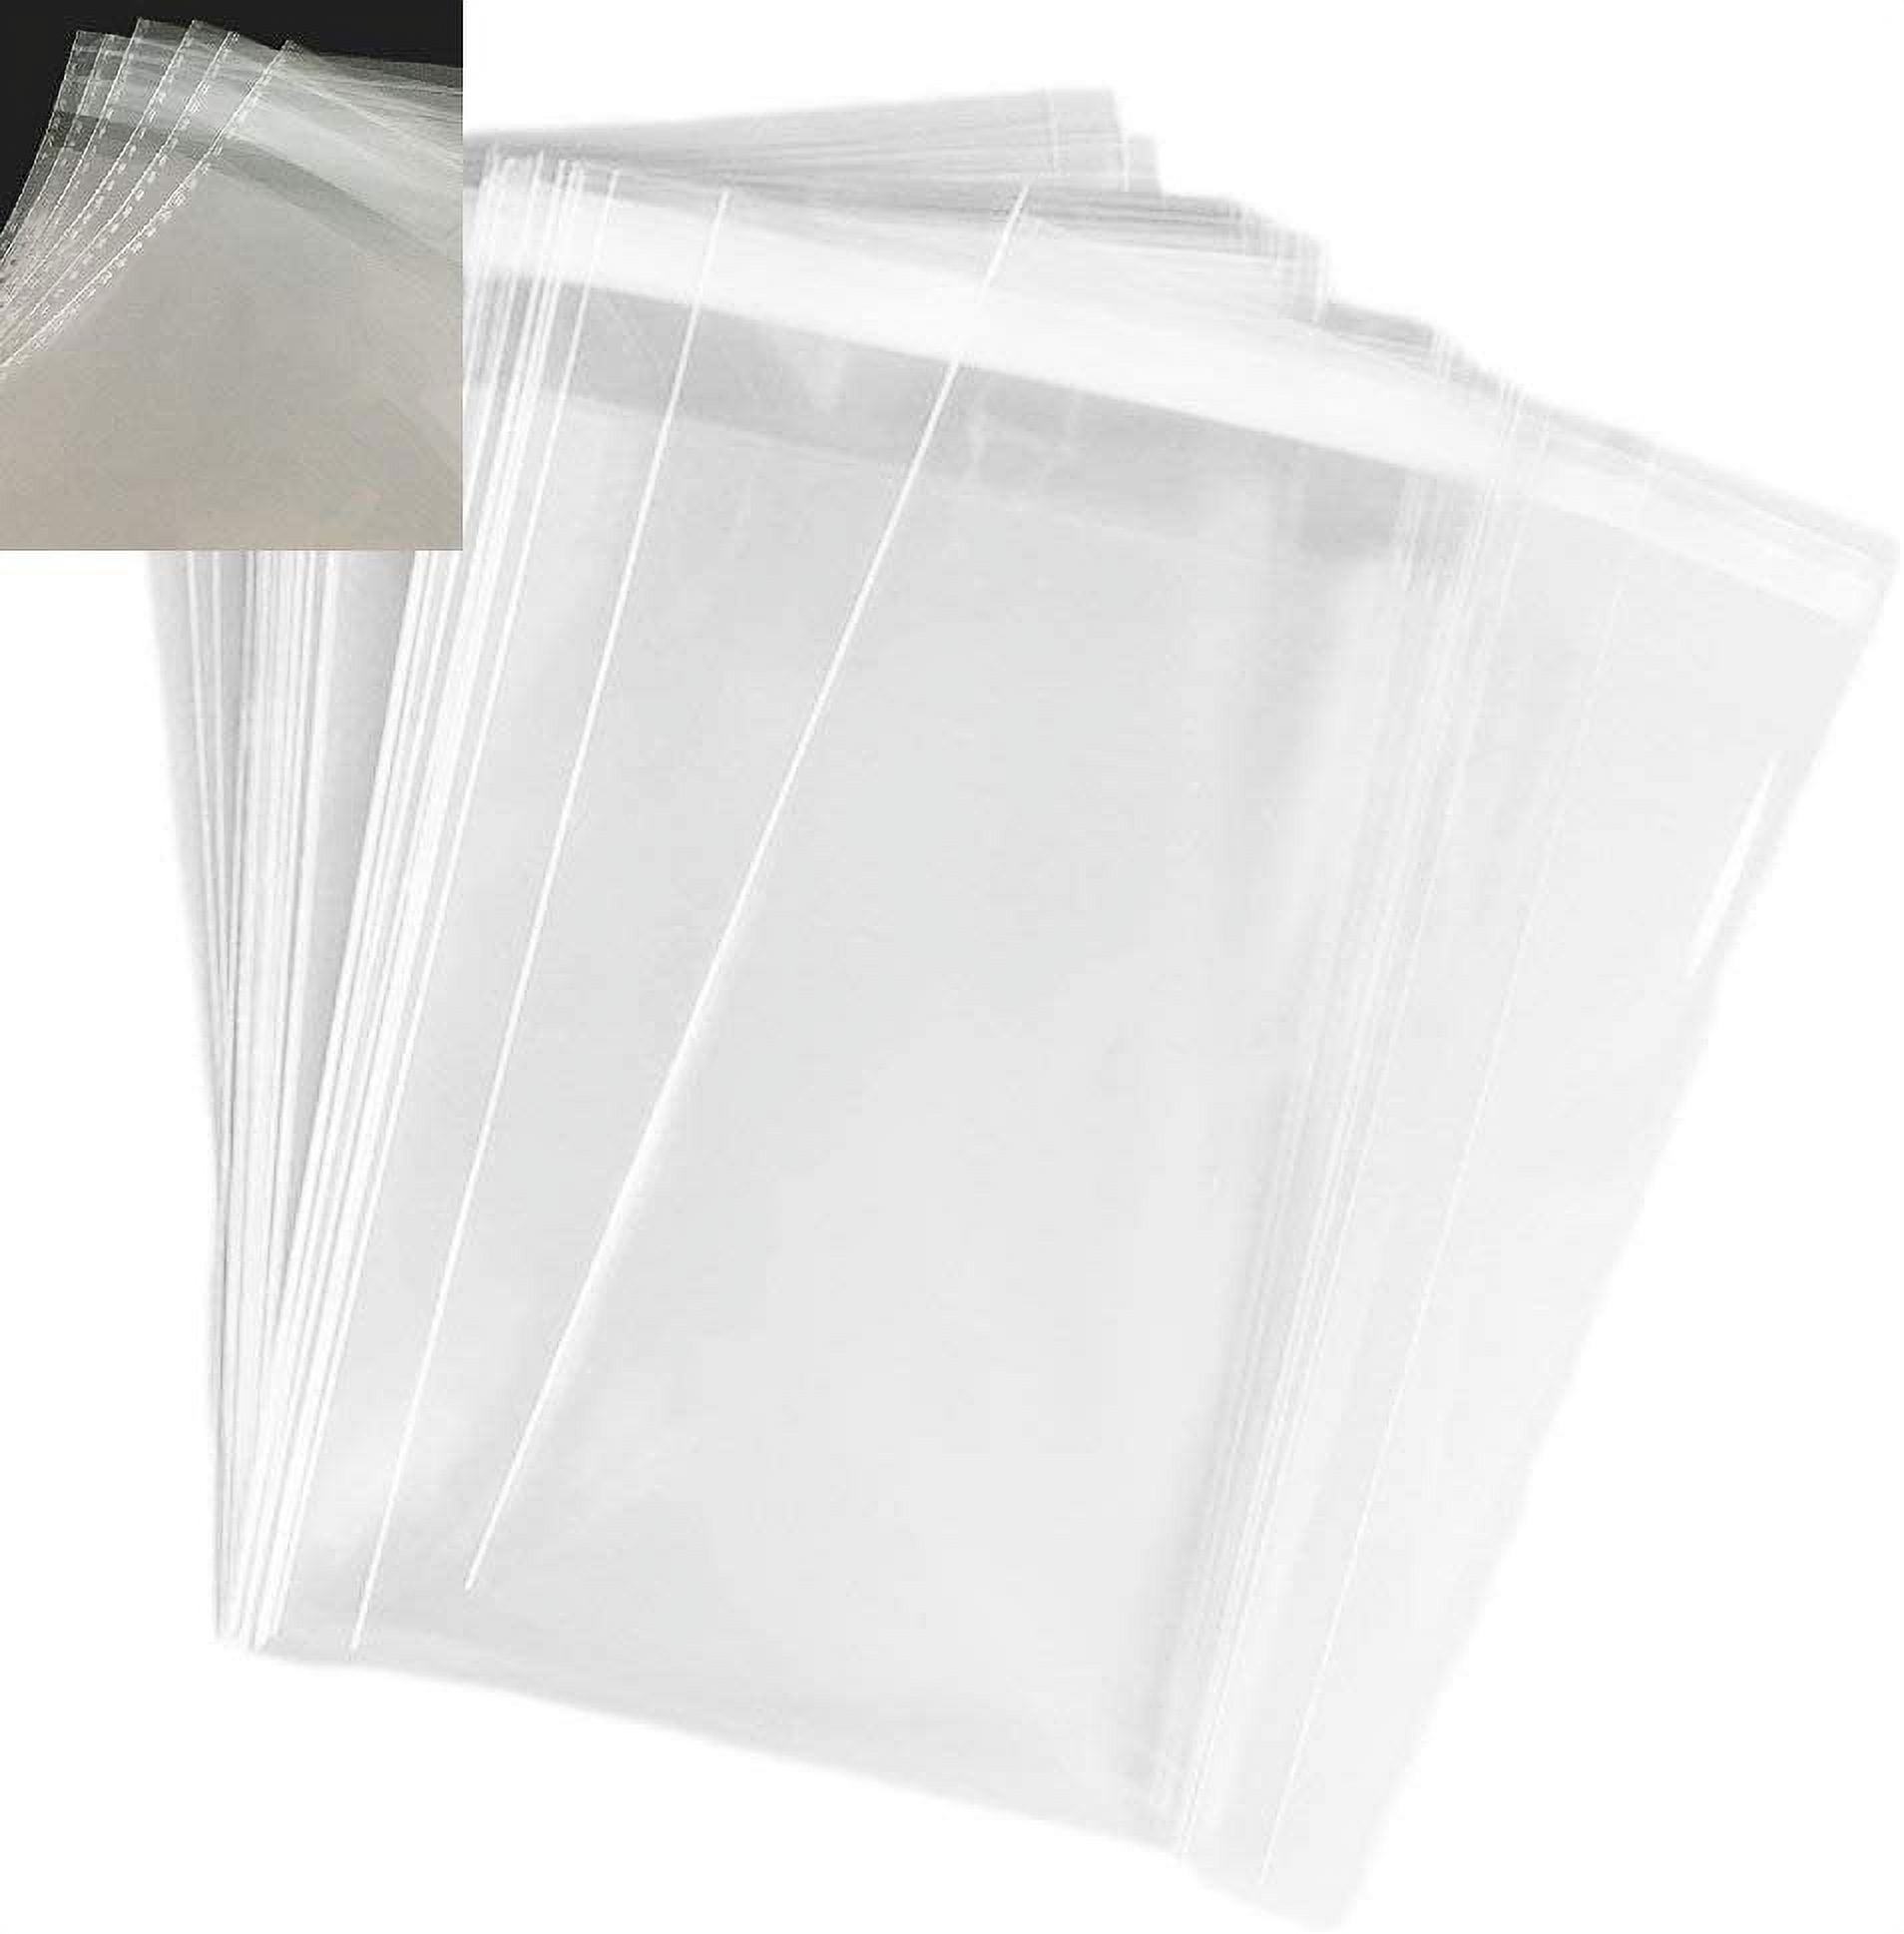 Plastic Bags Self Sealing 10x 8 4 MIL 1000 Pieces free Domestic